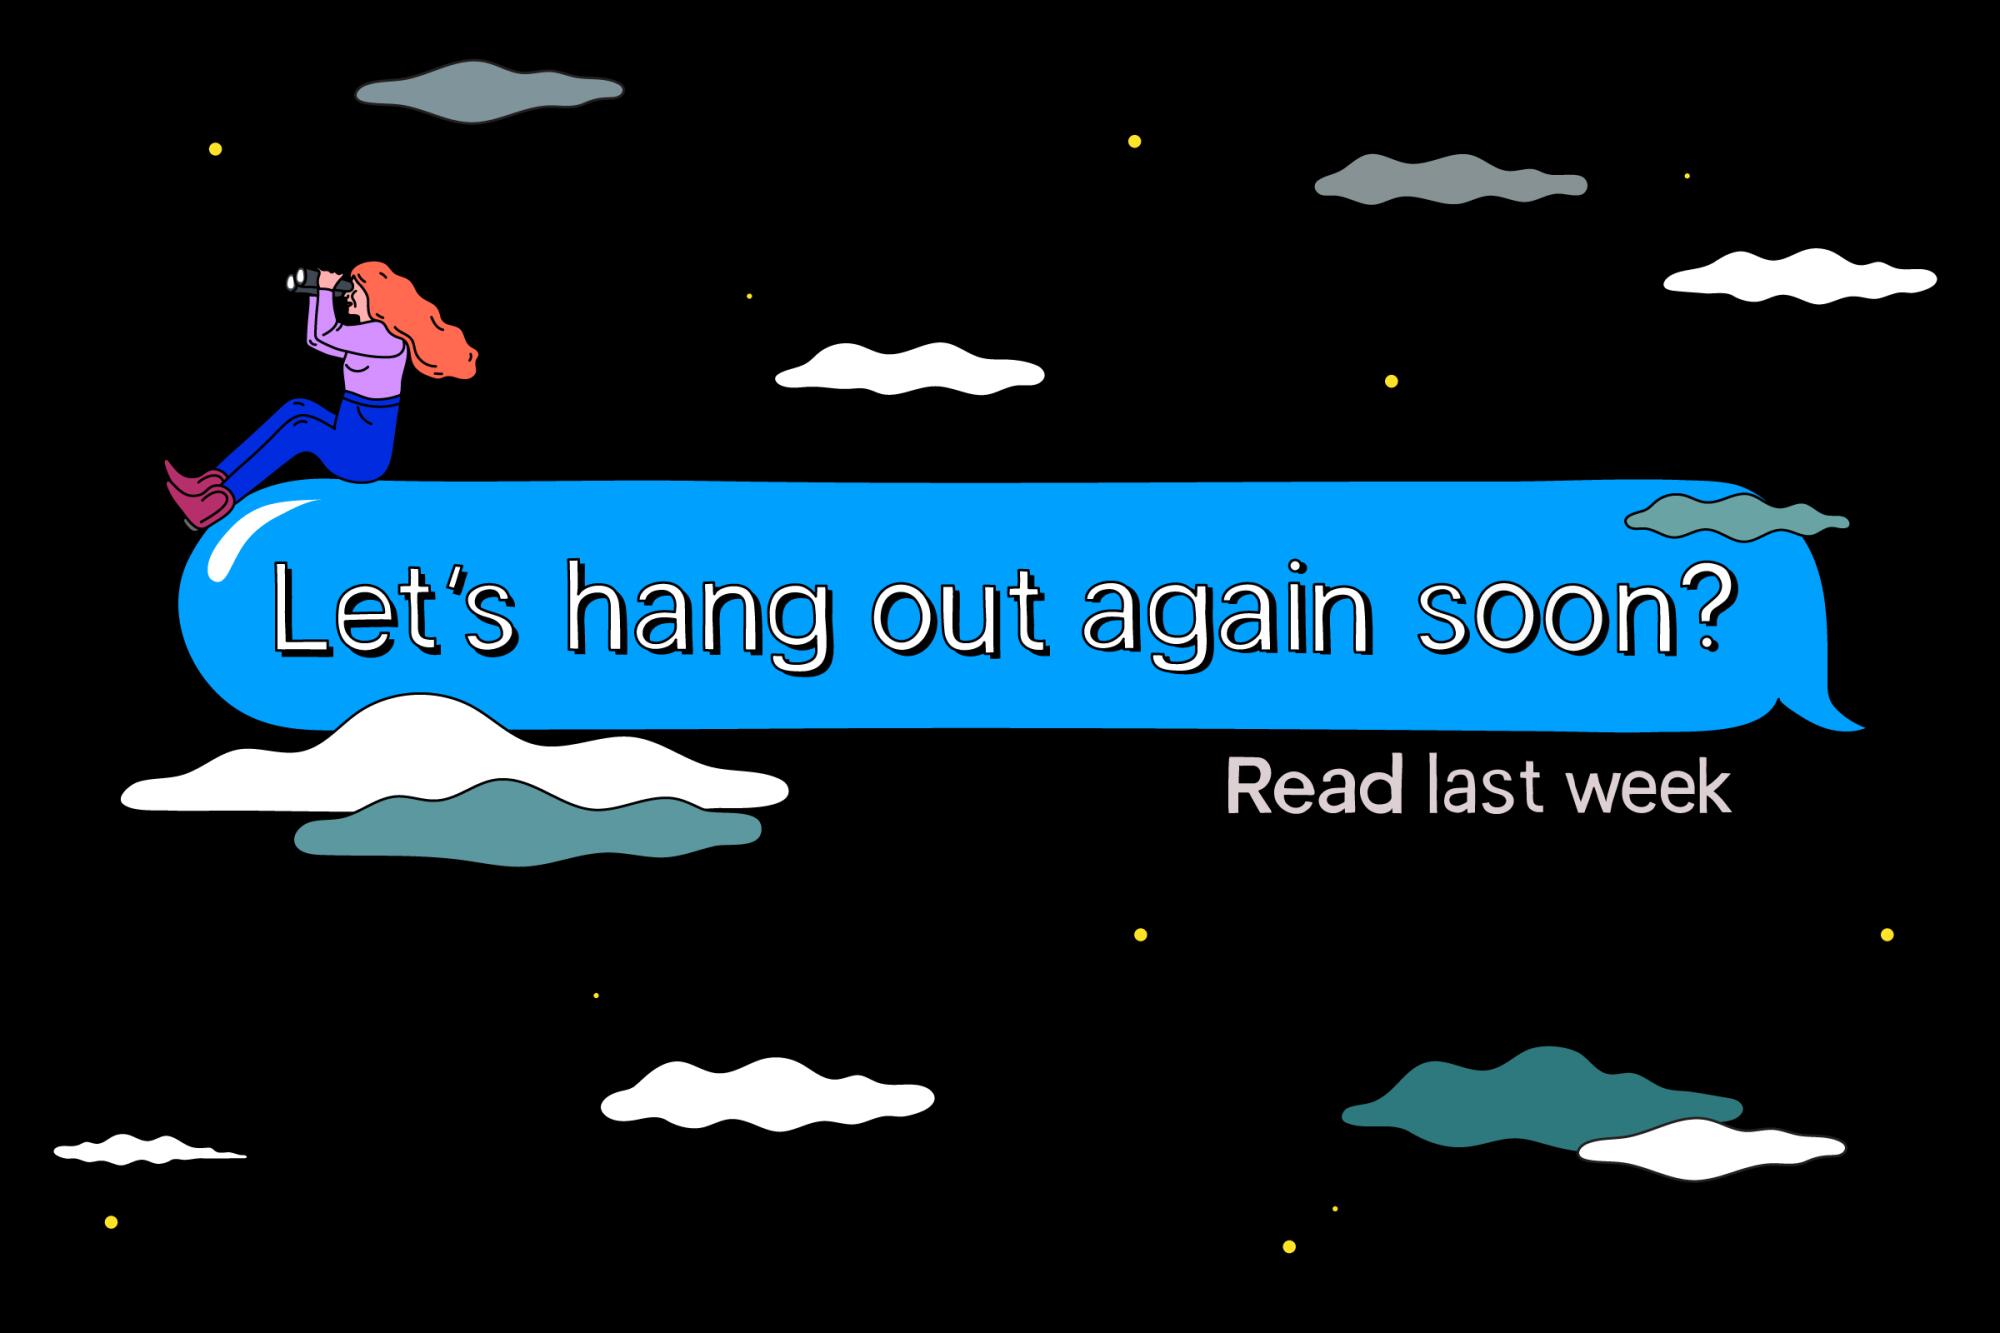 Woman sitting in the clouds on a floating blue text bubble that reads "Let's hang out again soon?"